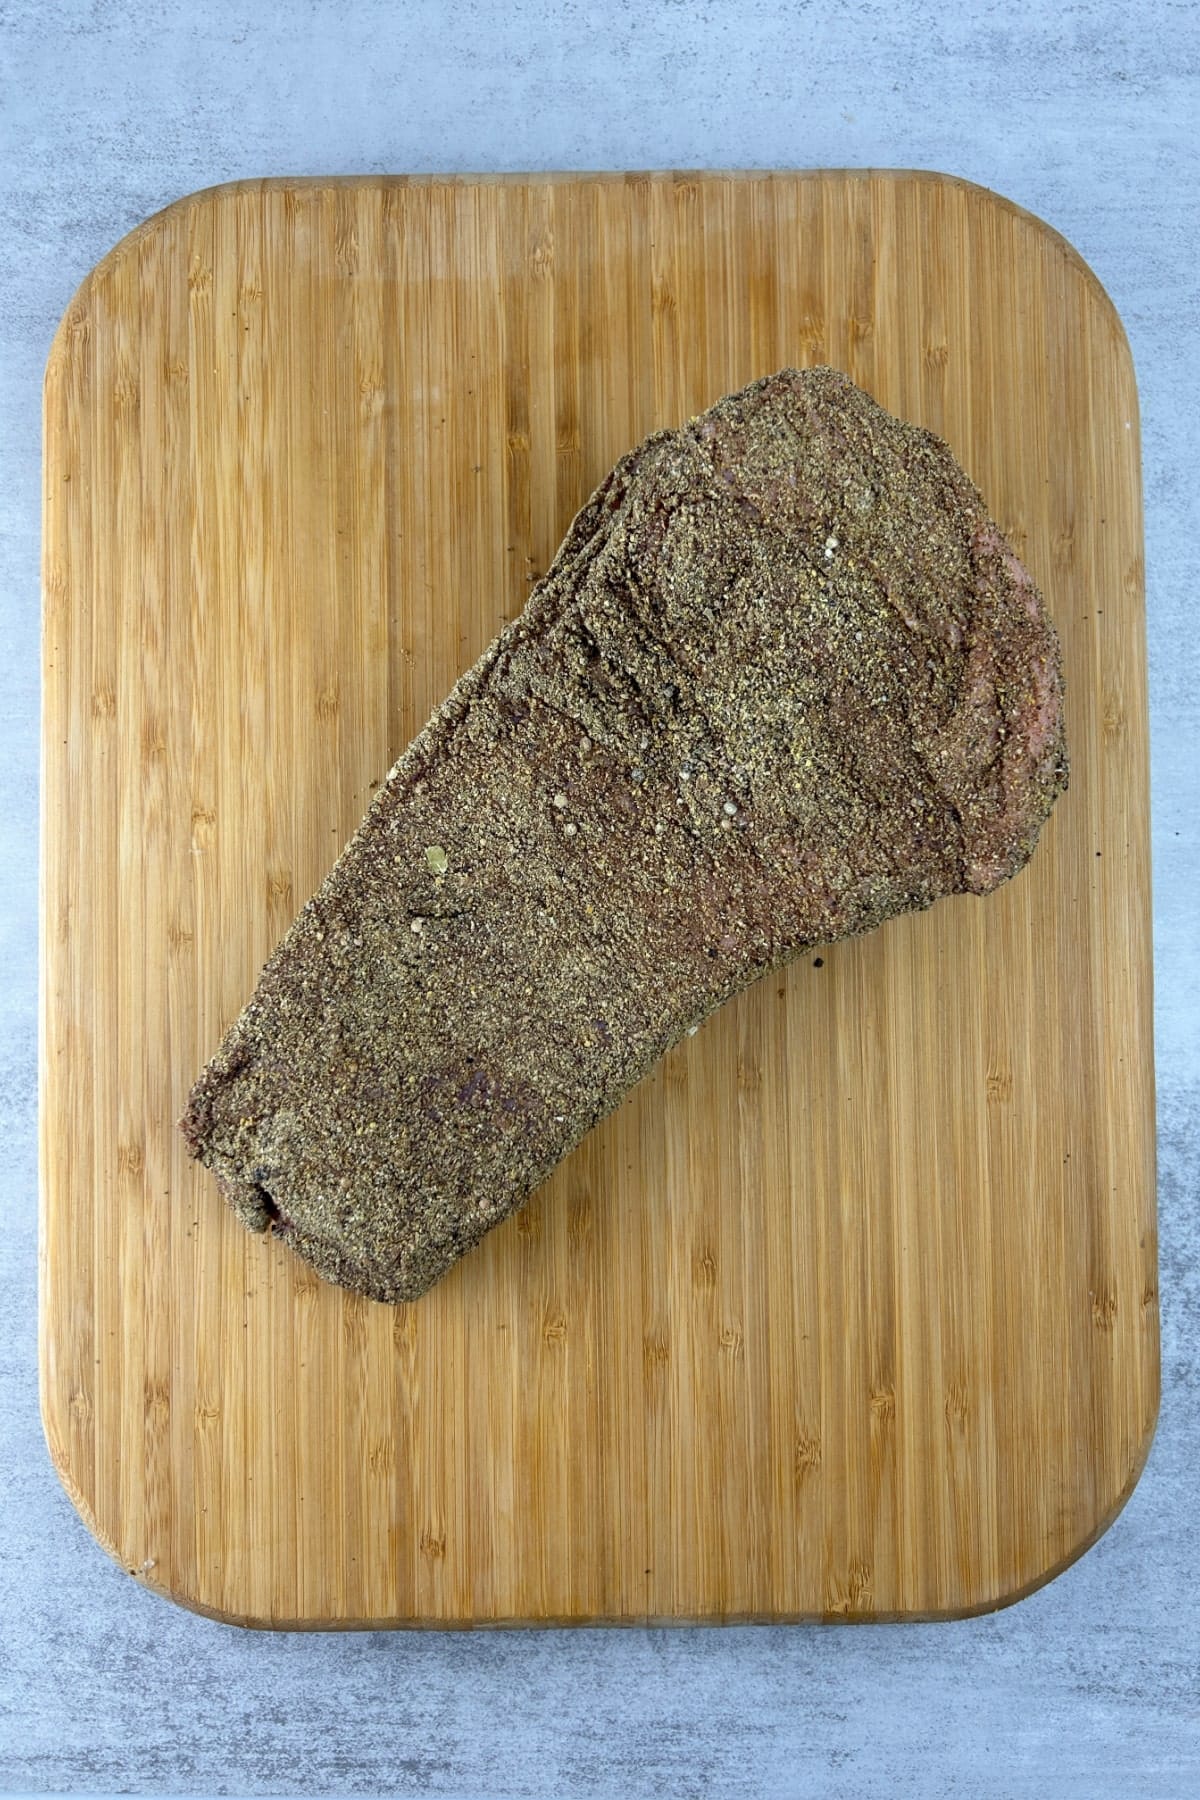 A cut of corned beef piece on a wooden cutting board.